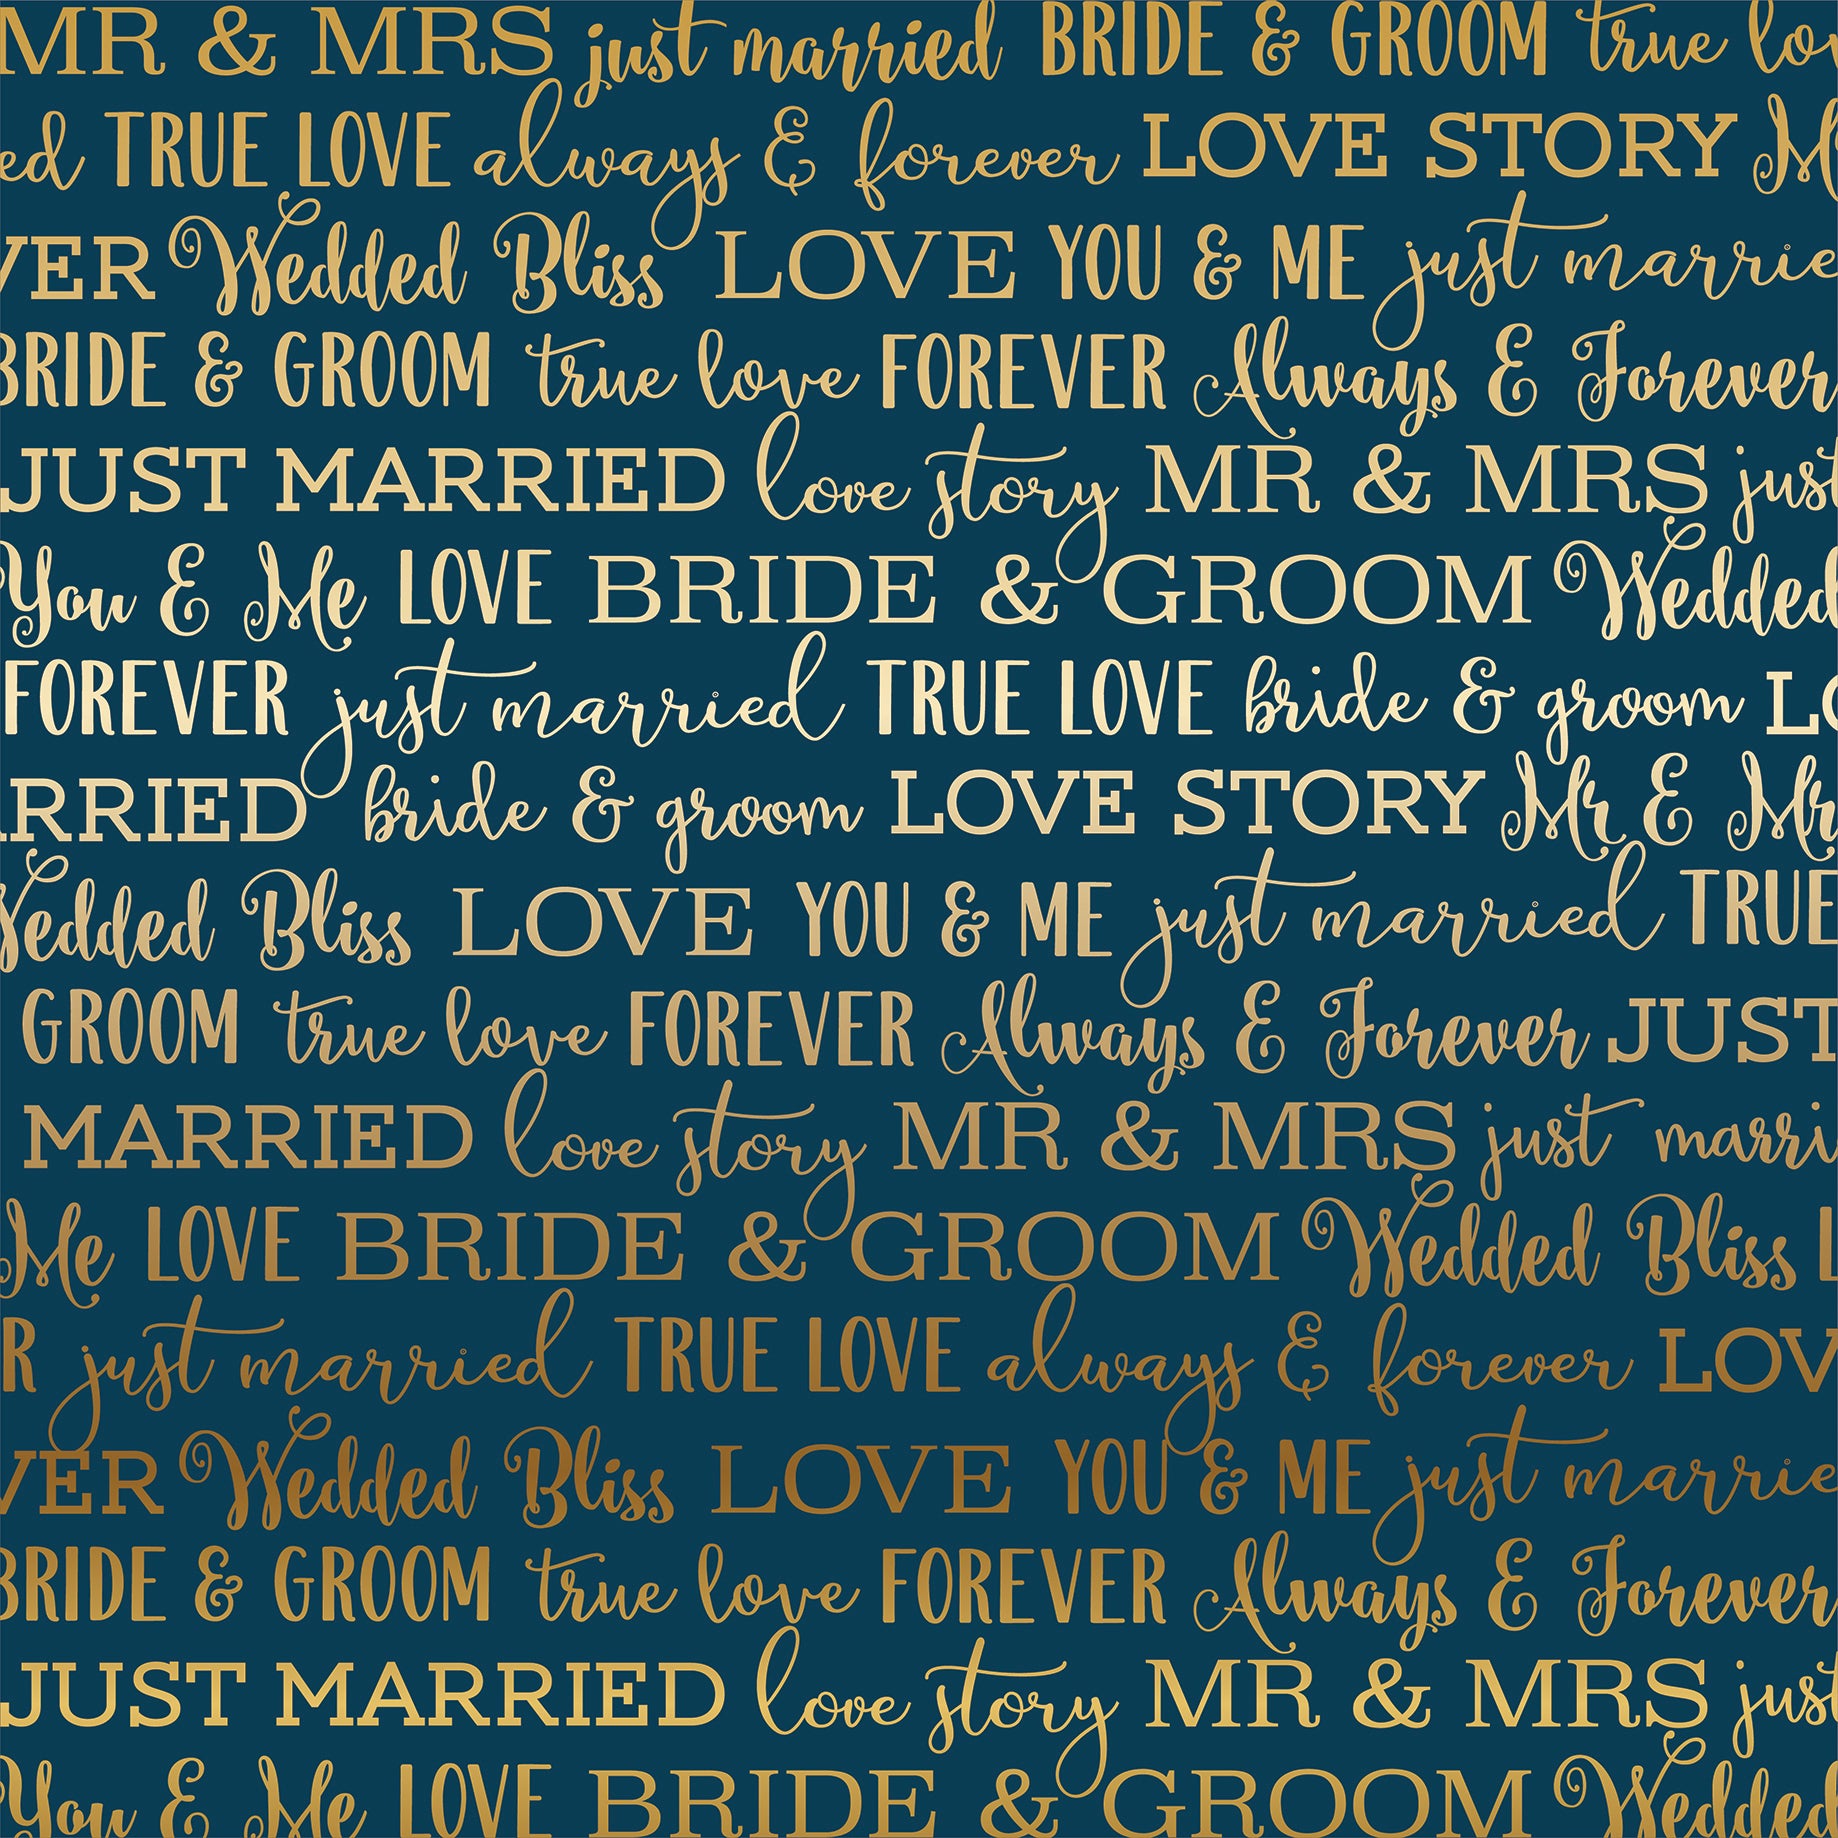 Love Story Collection Blue Love Story 12 x 12 Gold Foiled Scrapbook Paper by Carta Bella